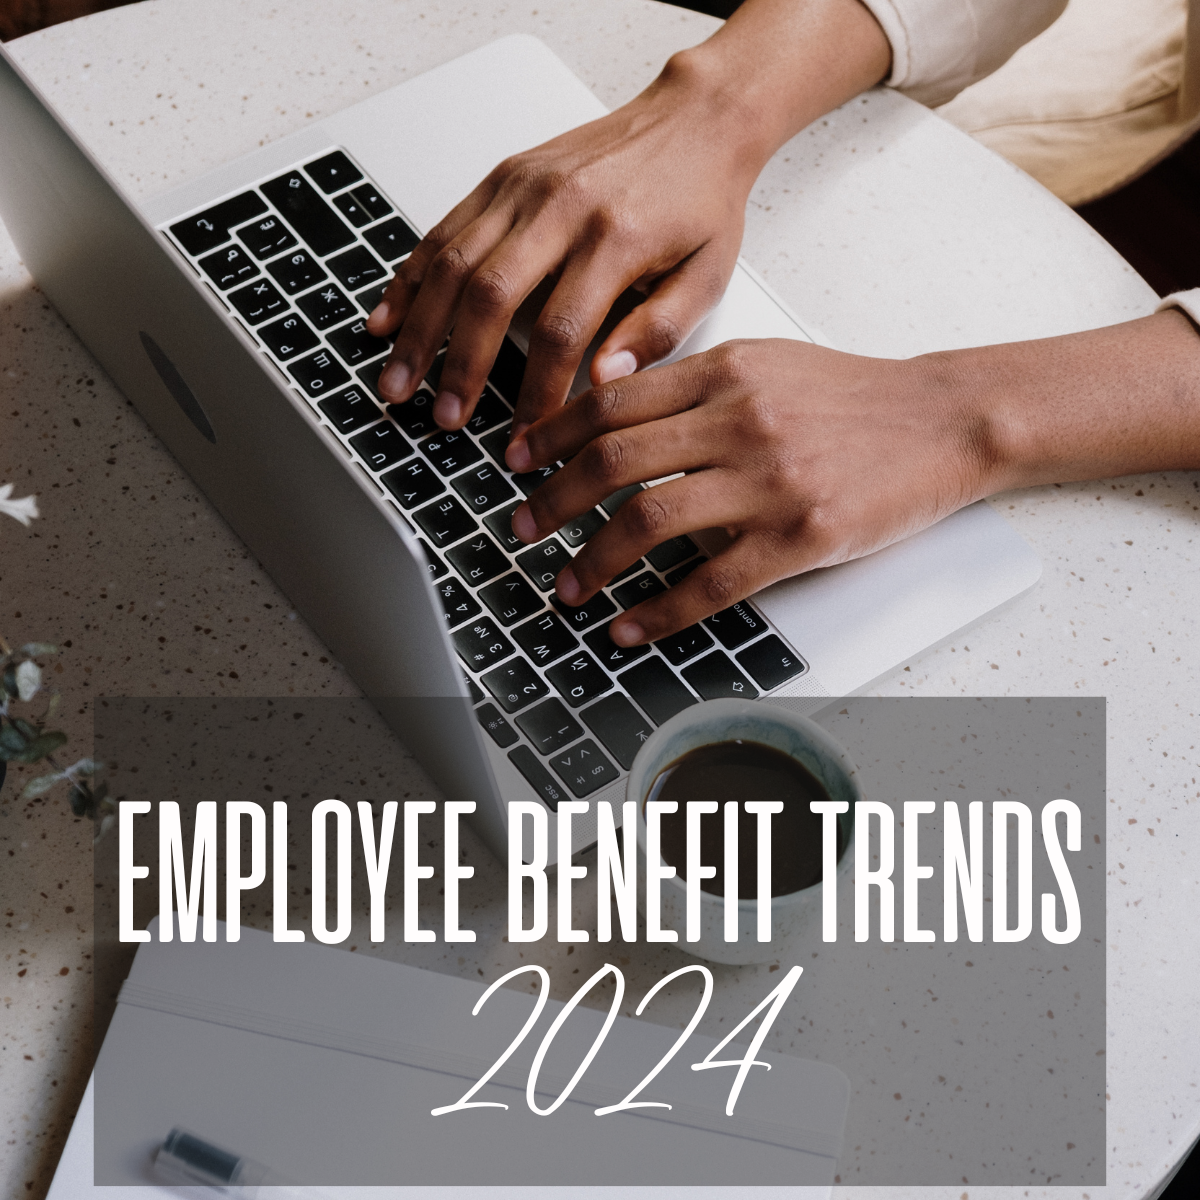 Top Benefit Trends for 2024